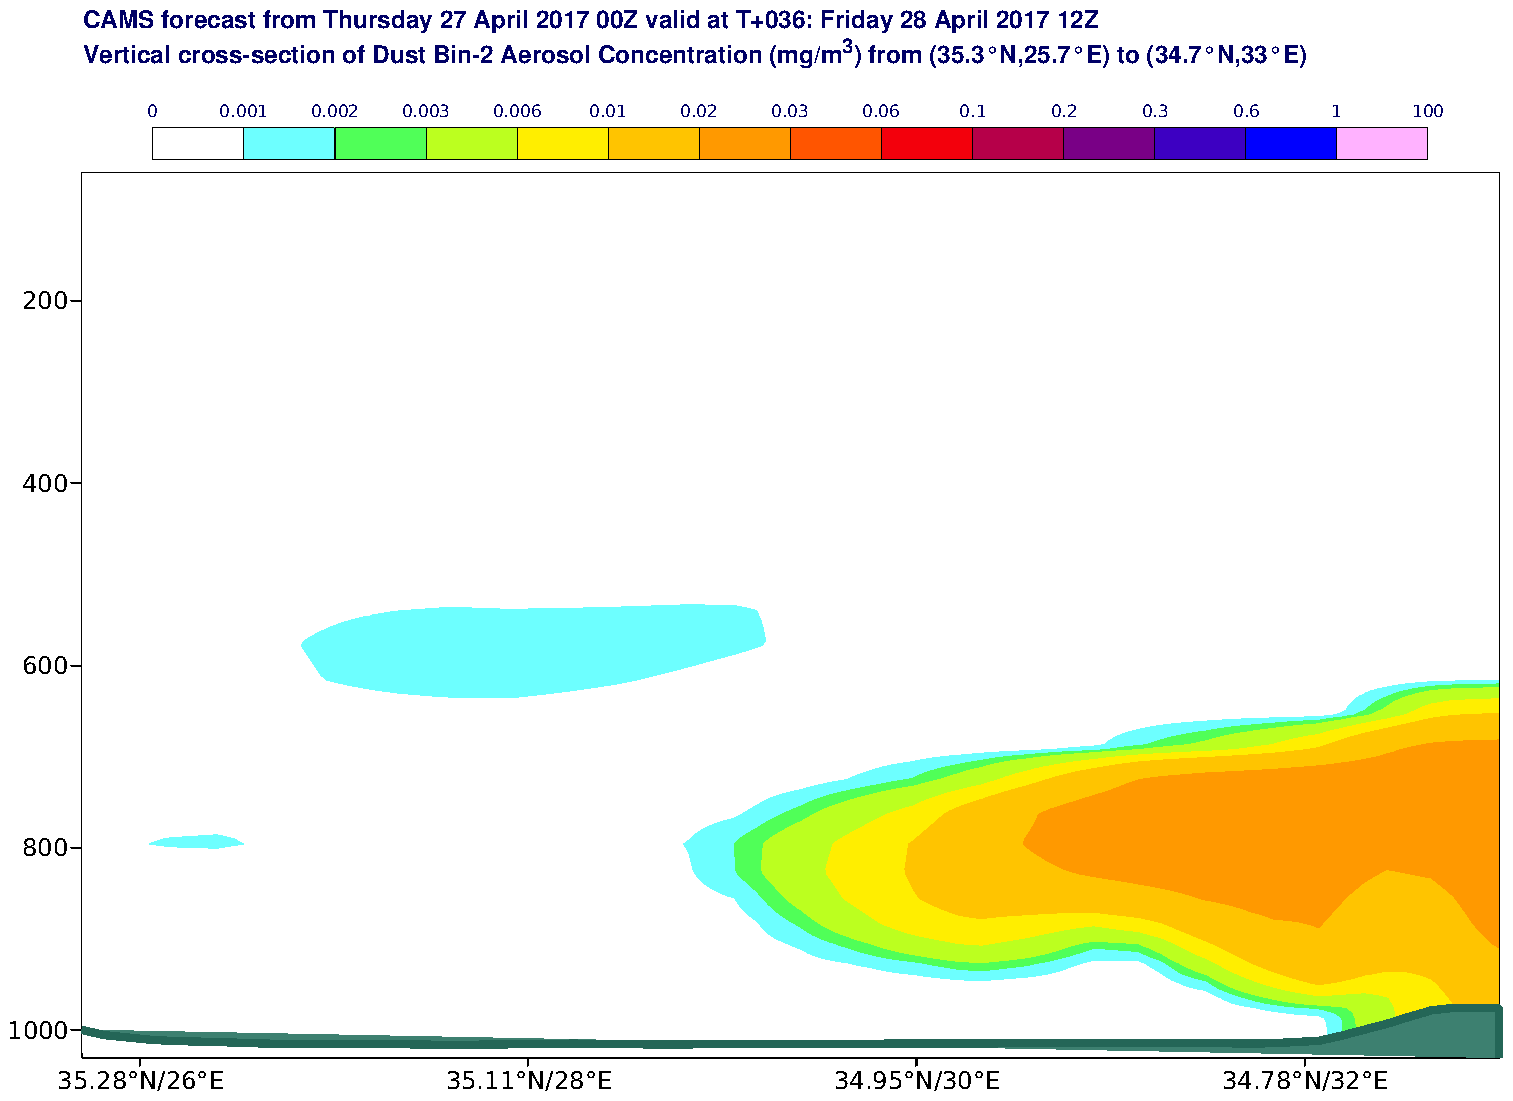 Vertical cross-section of Dust Bin-2 Aerosol Concentration (mg/m3) valid at T36 - 2017-04-28 12:00